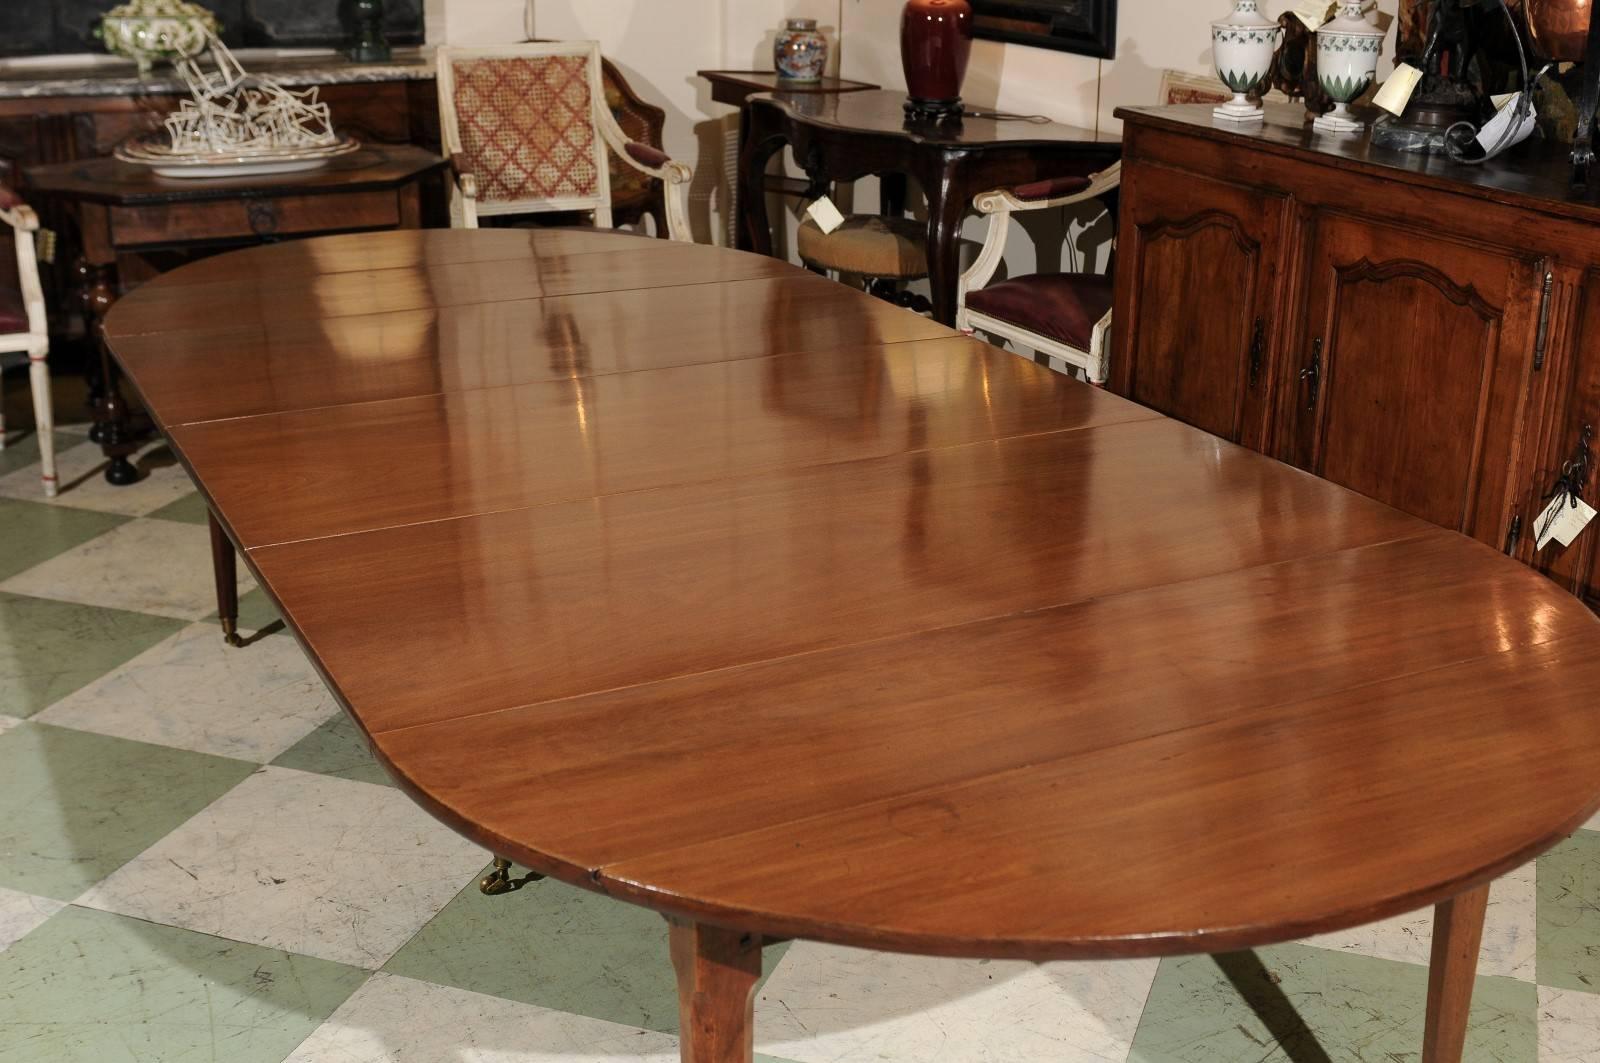 Brass Directoire Mahogany Extending Dining Table with Tapered Legs, Late 18th Century